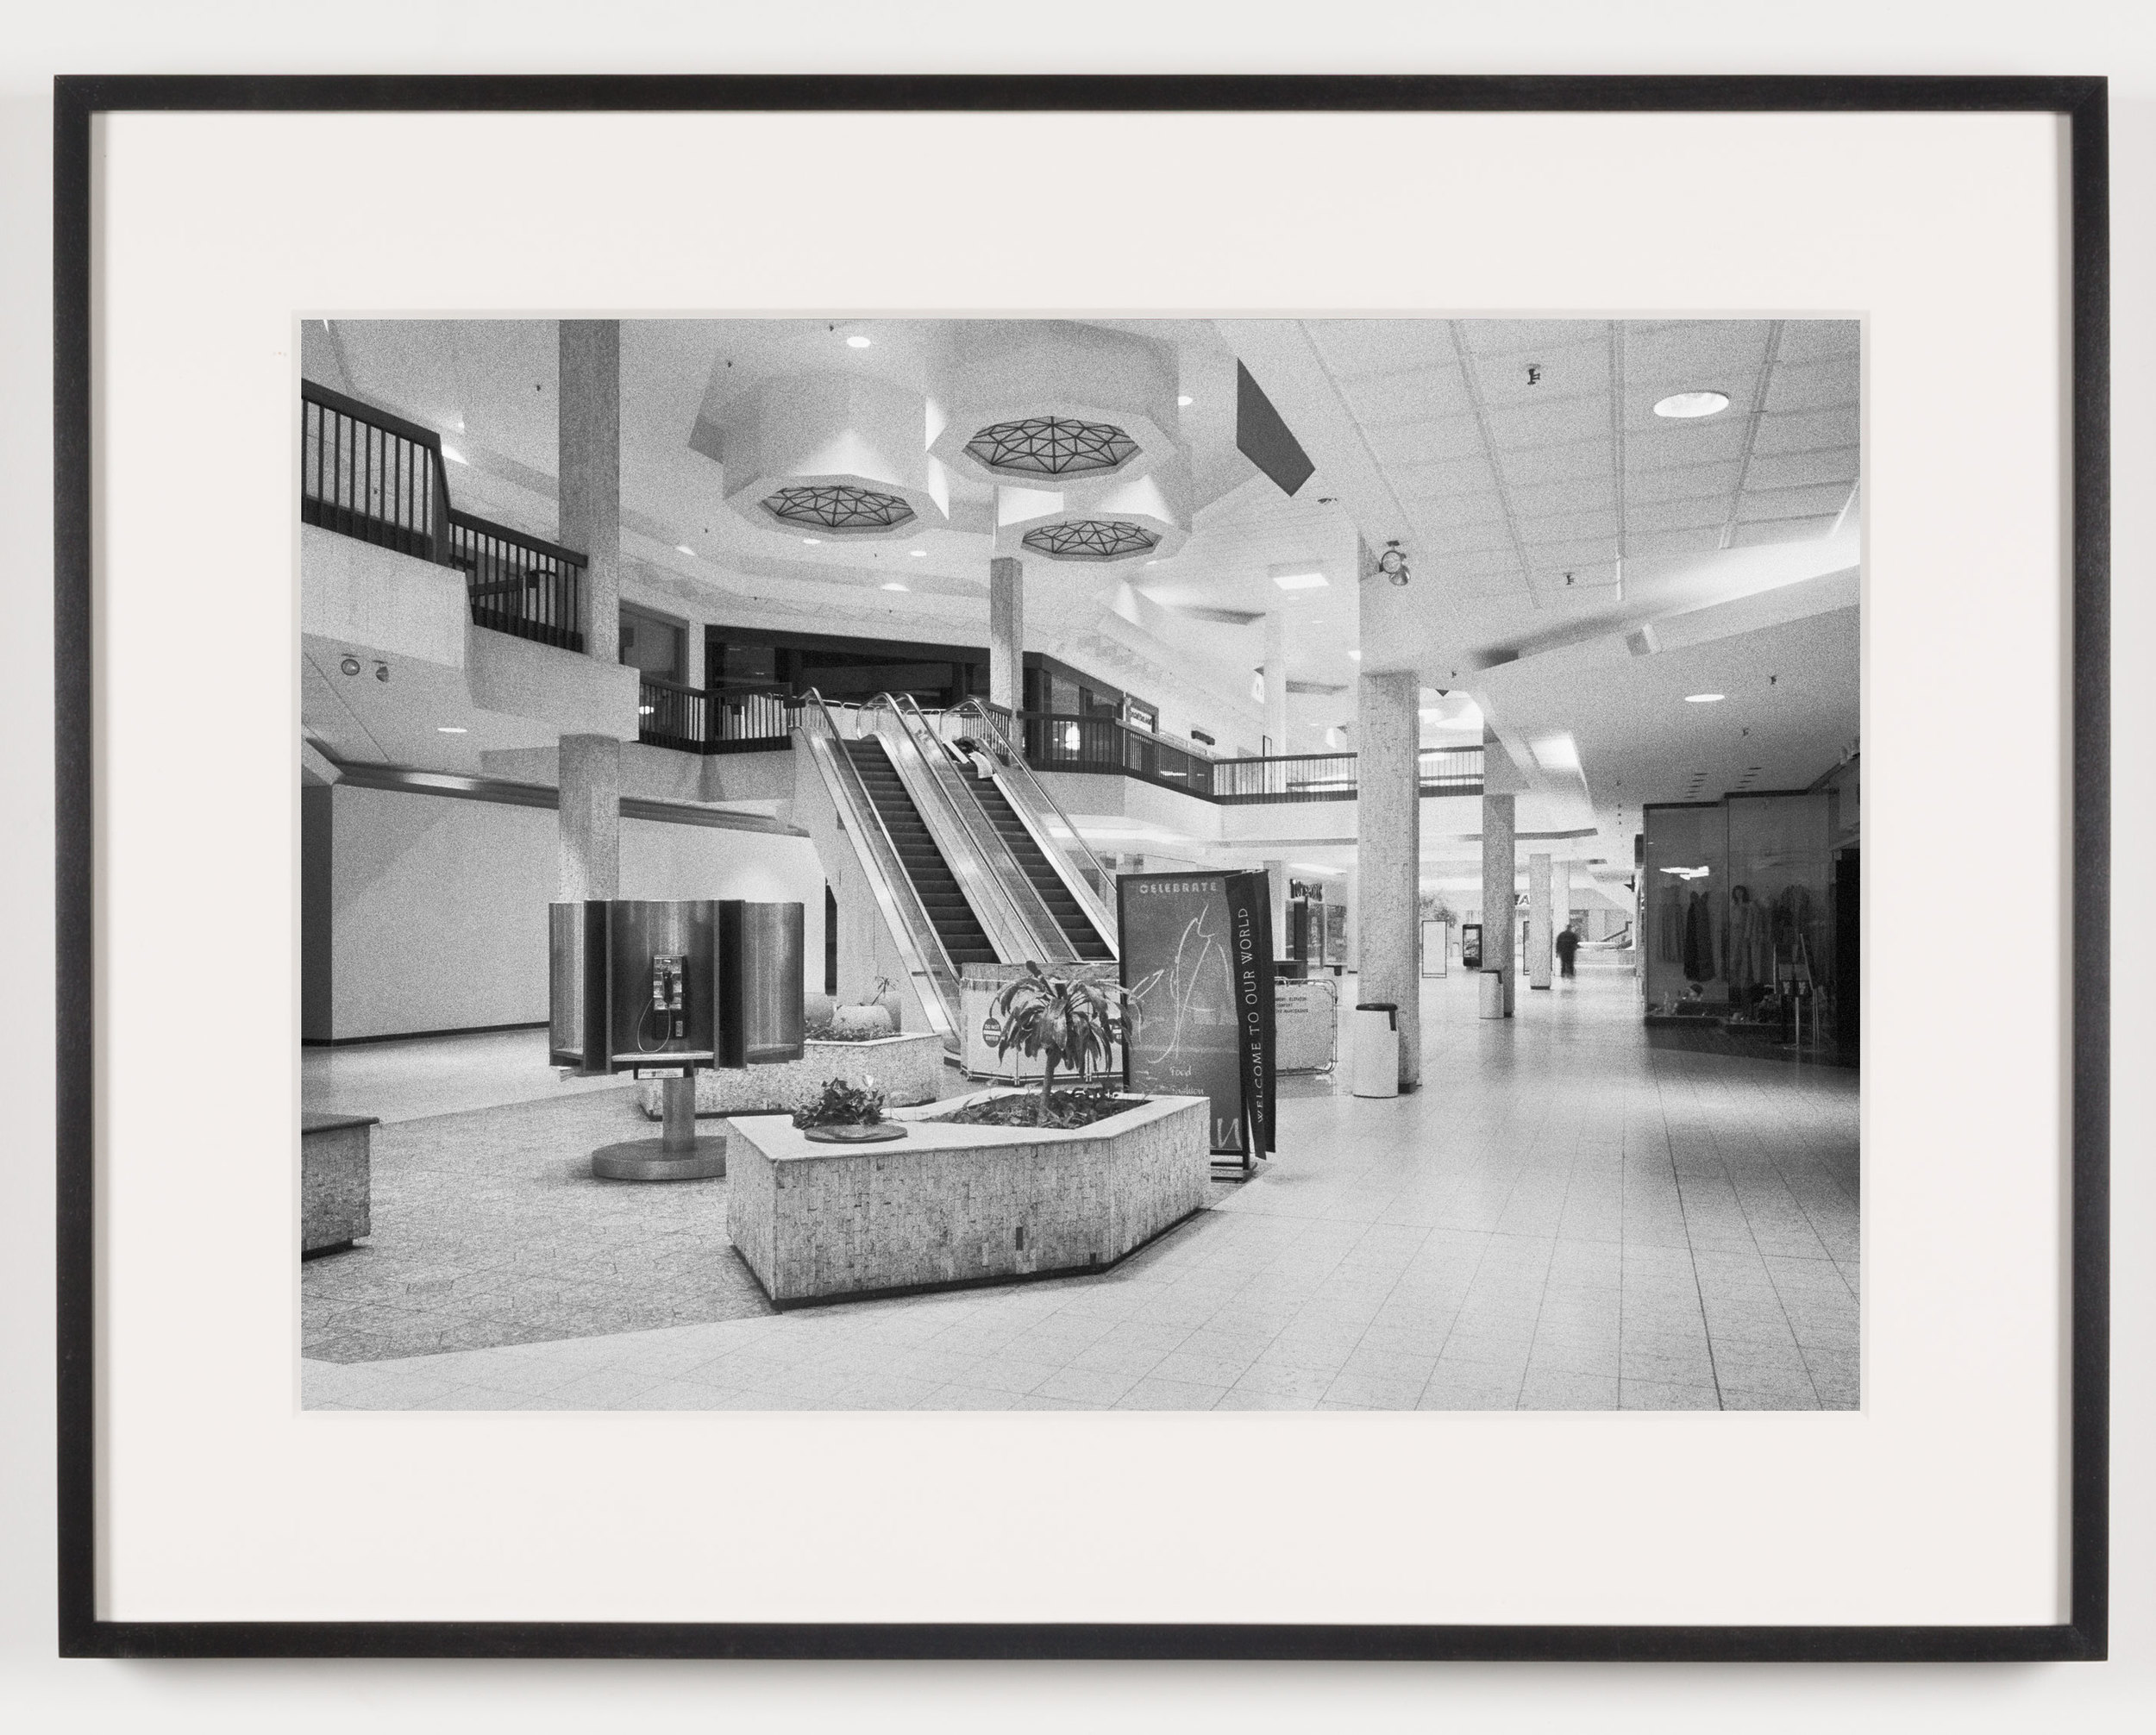   Randall Park Mall (View of Interior), North Randall, OH, Est. 1976, Demo. 2014    2011   Epson Ultrachrome K3 archival ink jet print on Hahnemühle Photo Rag paper  21 5/8 x 28 1/8 inches   American Passages, 2001–2011     